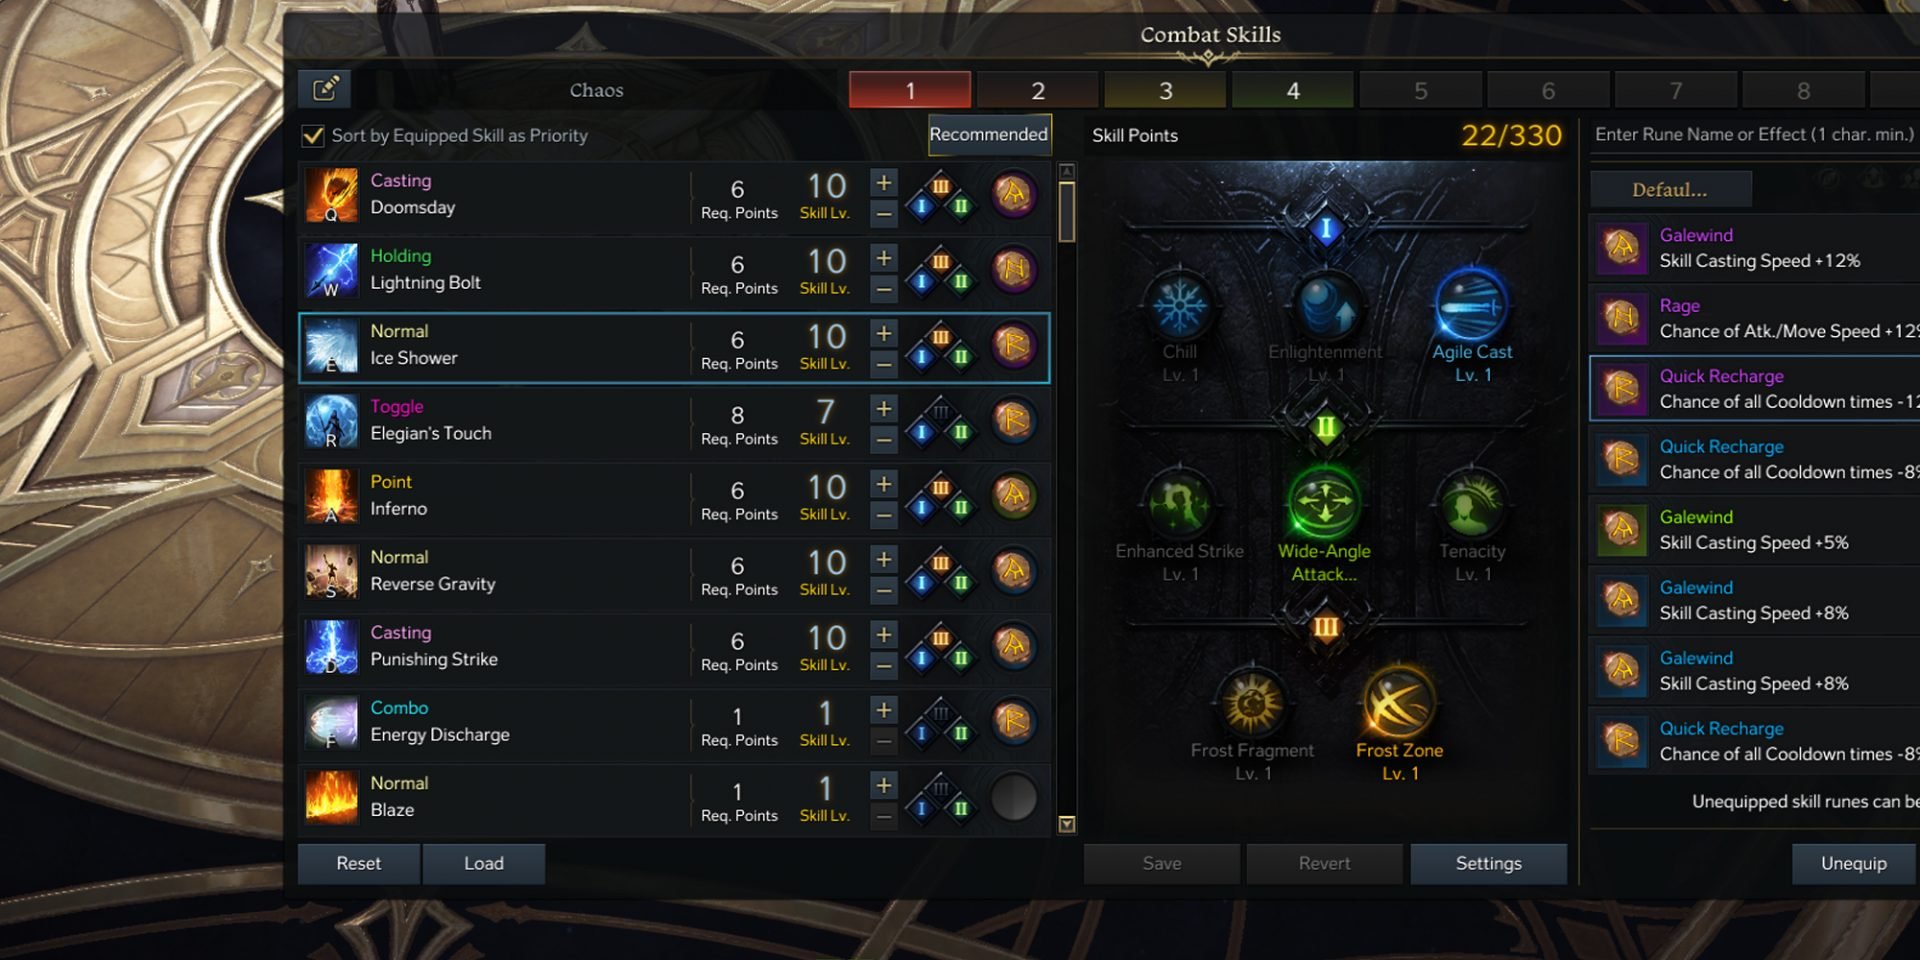 In-game screenshot of Sorceress skill selection for Chaos Dungeons in Lost Ark